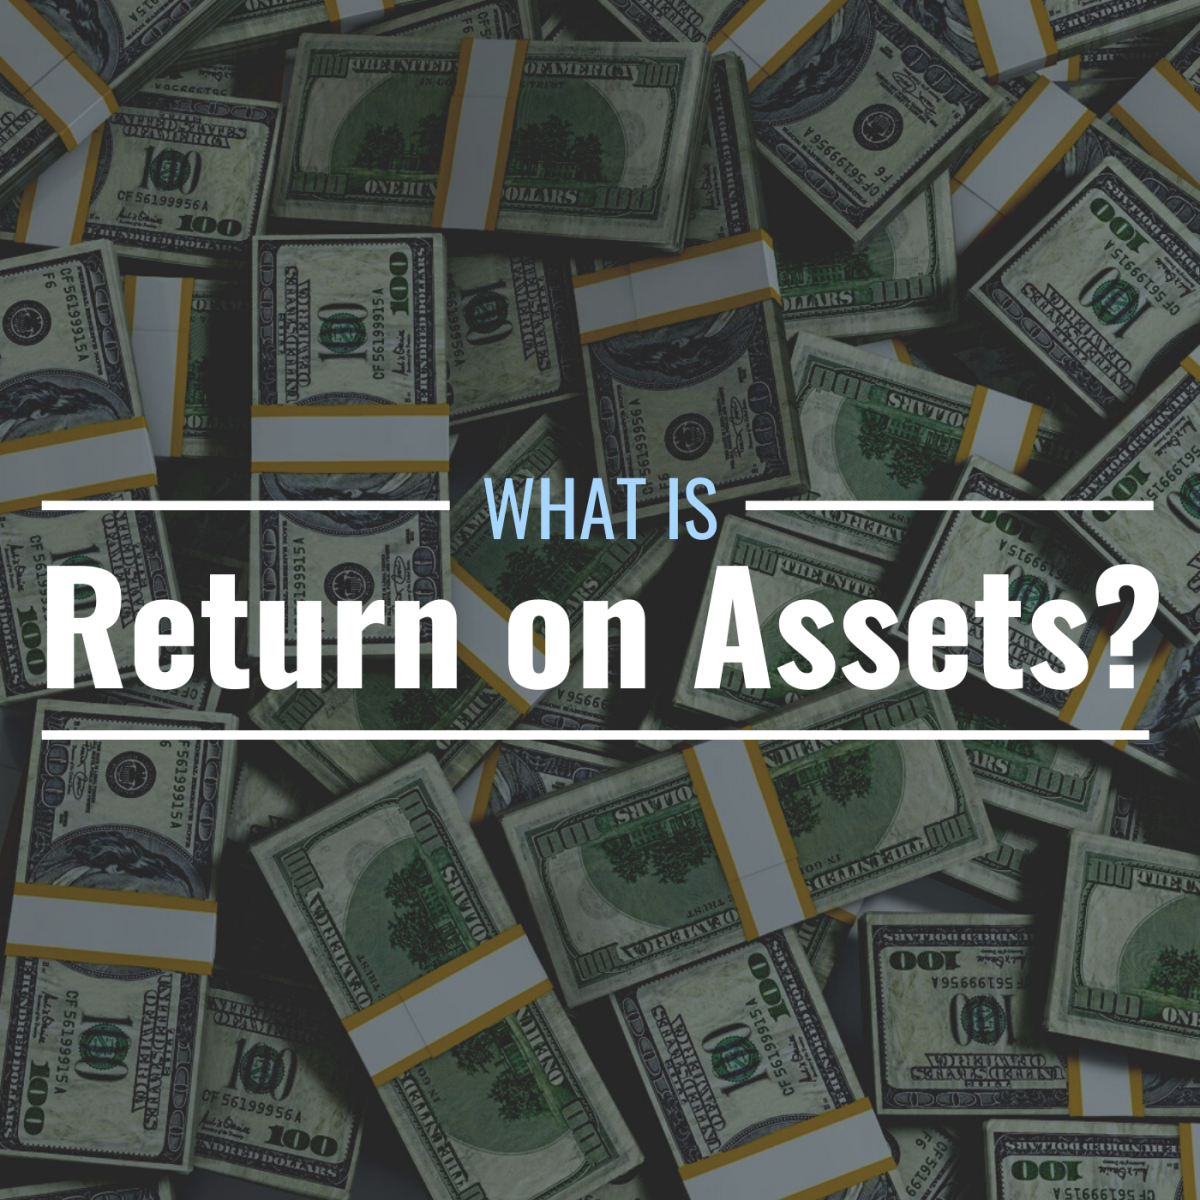 Photo of one-hundred dollar bills with text overlay that reads "What Is Return on Assets?"